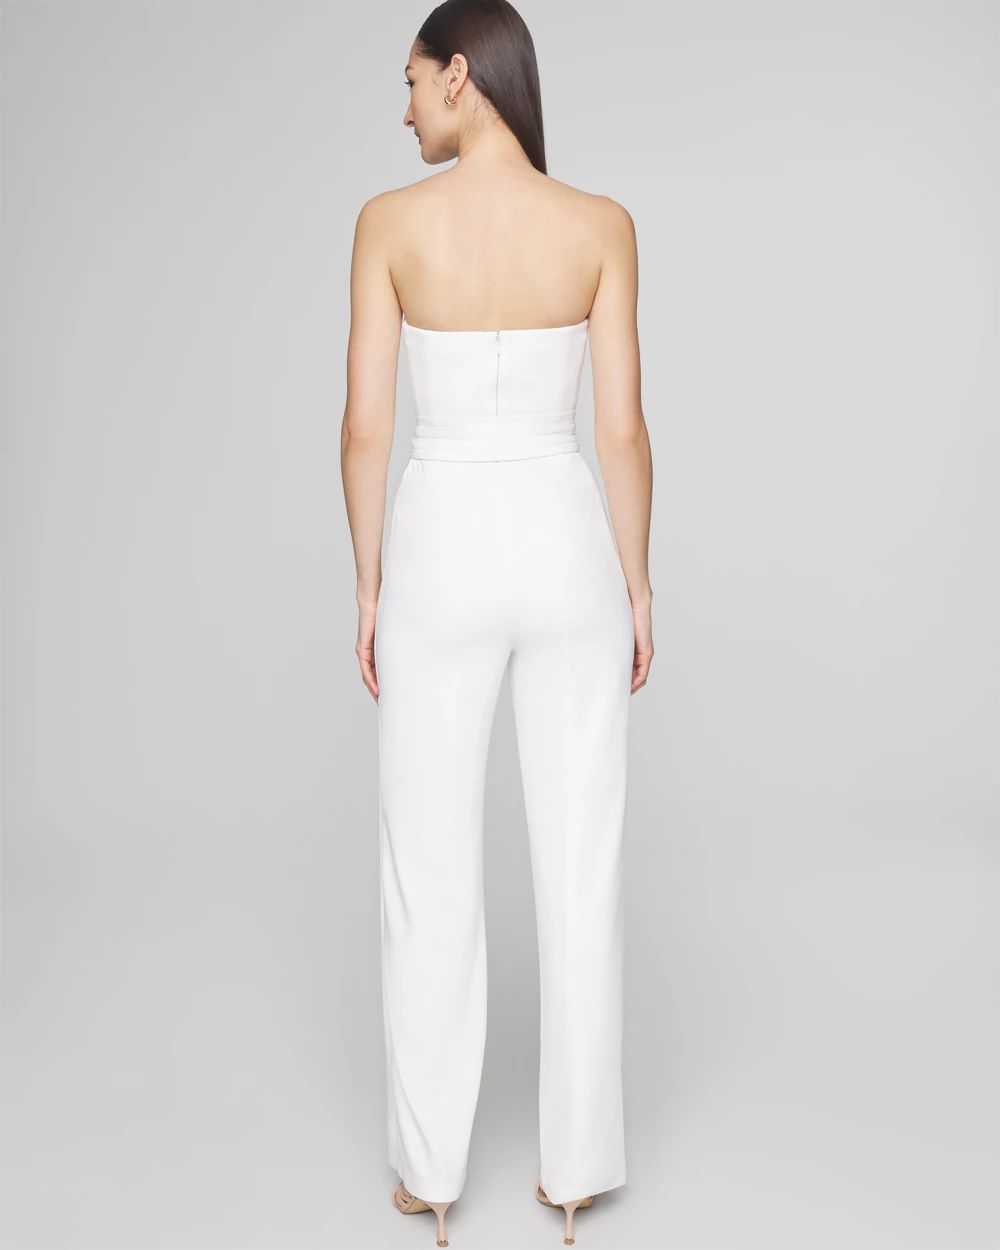 Petite Strapless Belted Jumpsuit click to view larger image.